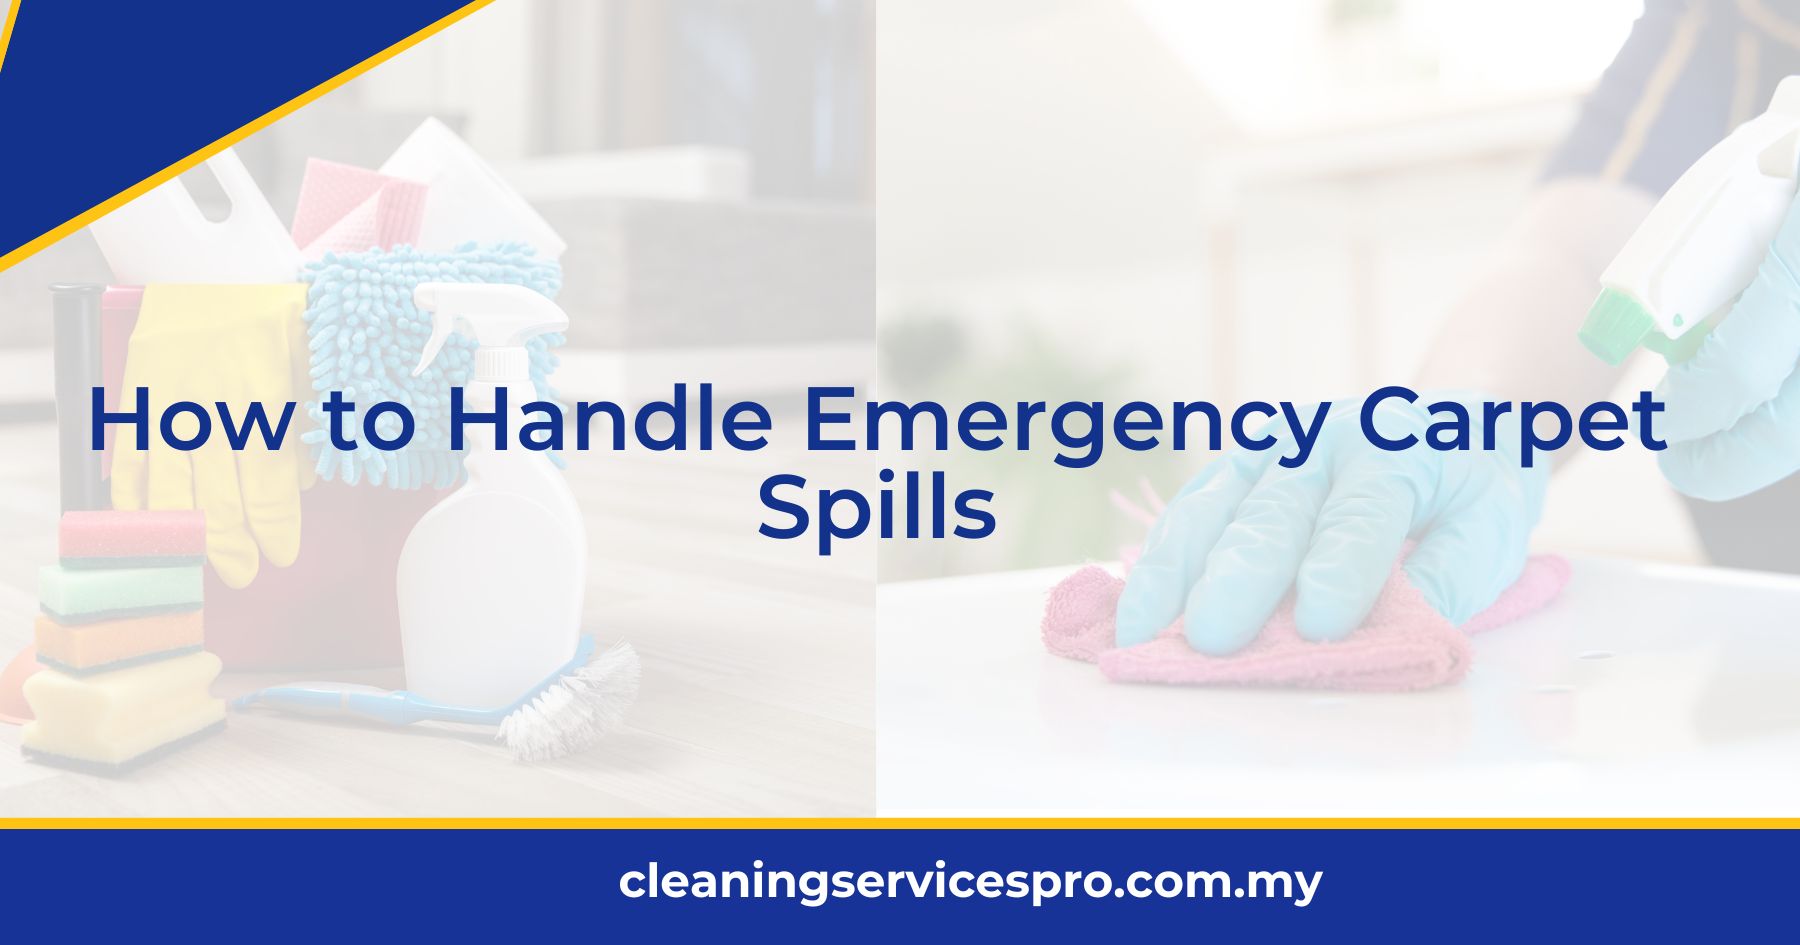 How to Handle Emergency Carpet Spills